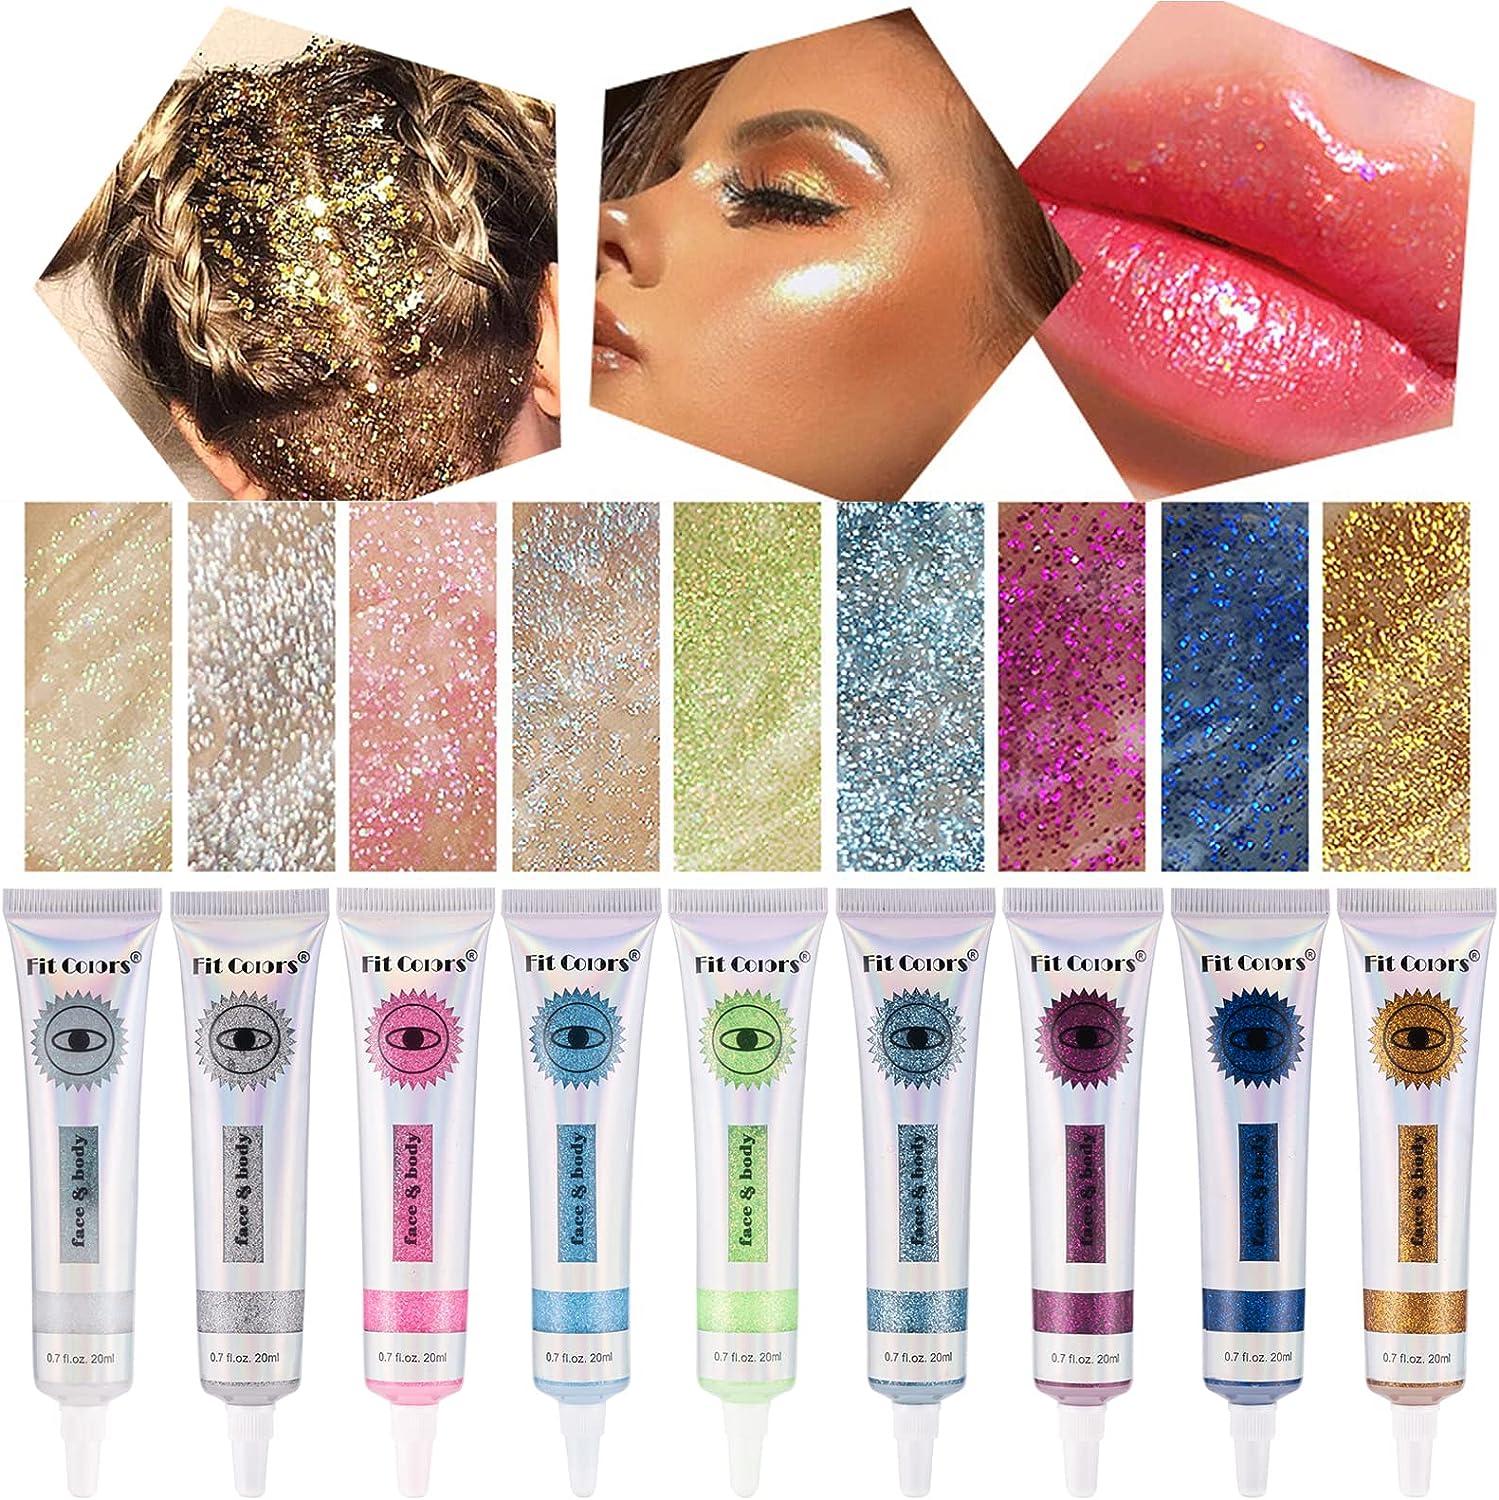 Roll On Body Glitter - Cosmetic-Grade, Easy to Use Holographic Body Glitter  Gel for Body, Face, Hair and Lip, Sparkling Sequins Festival Glitter